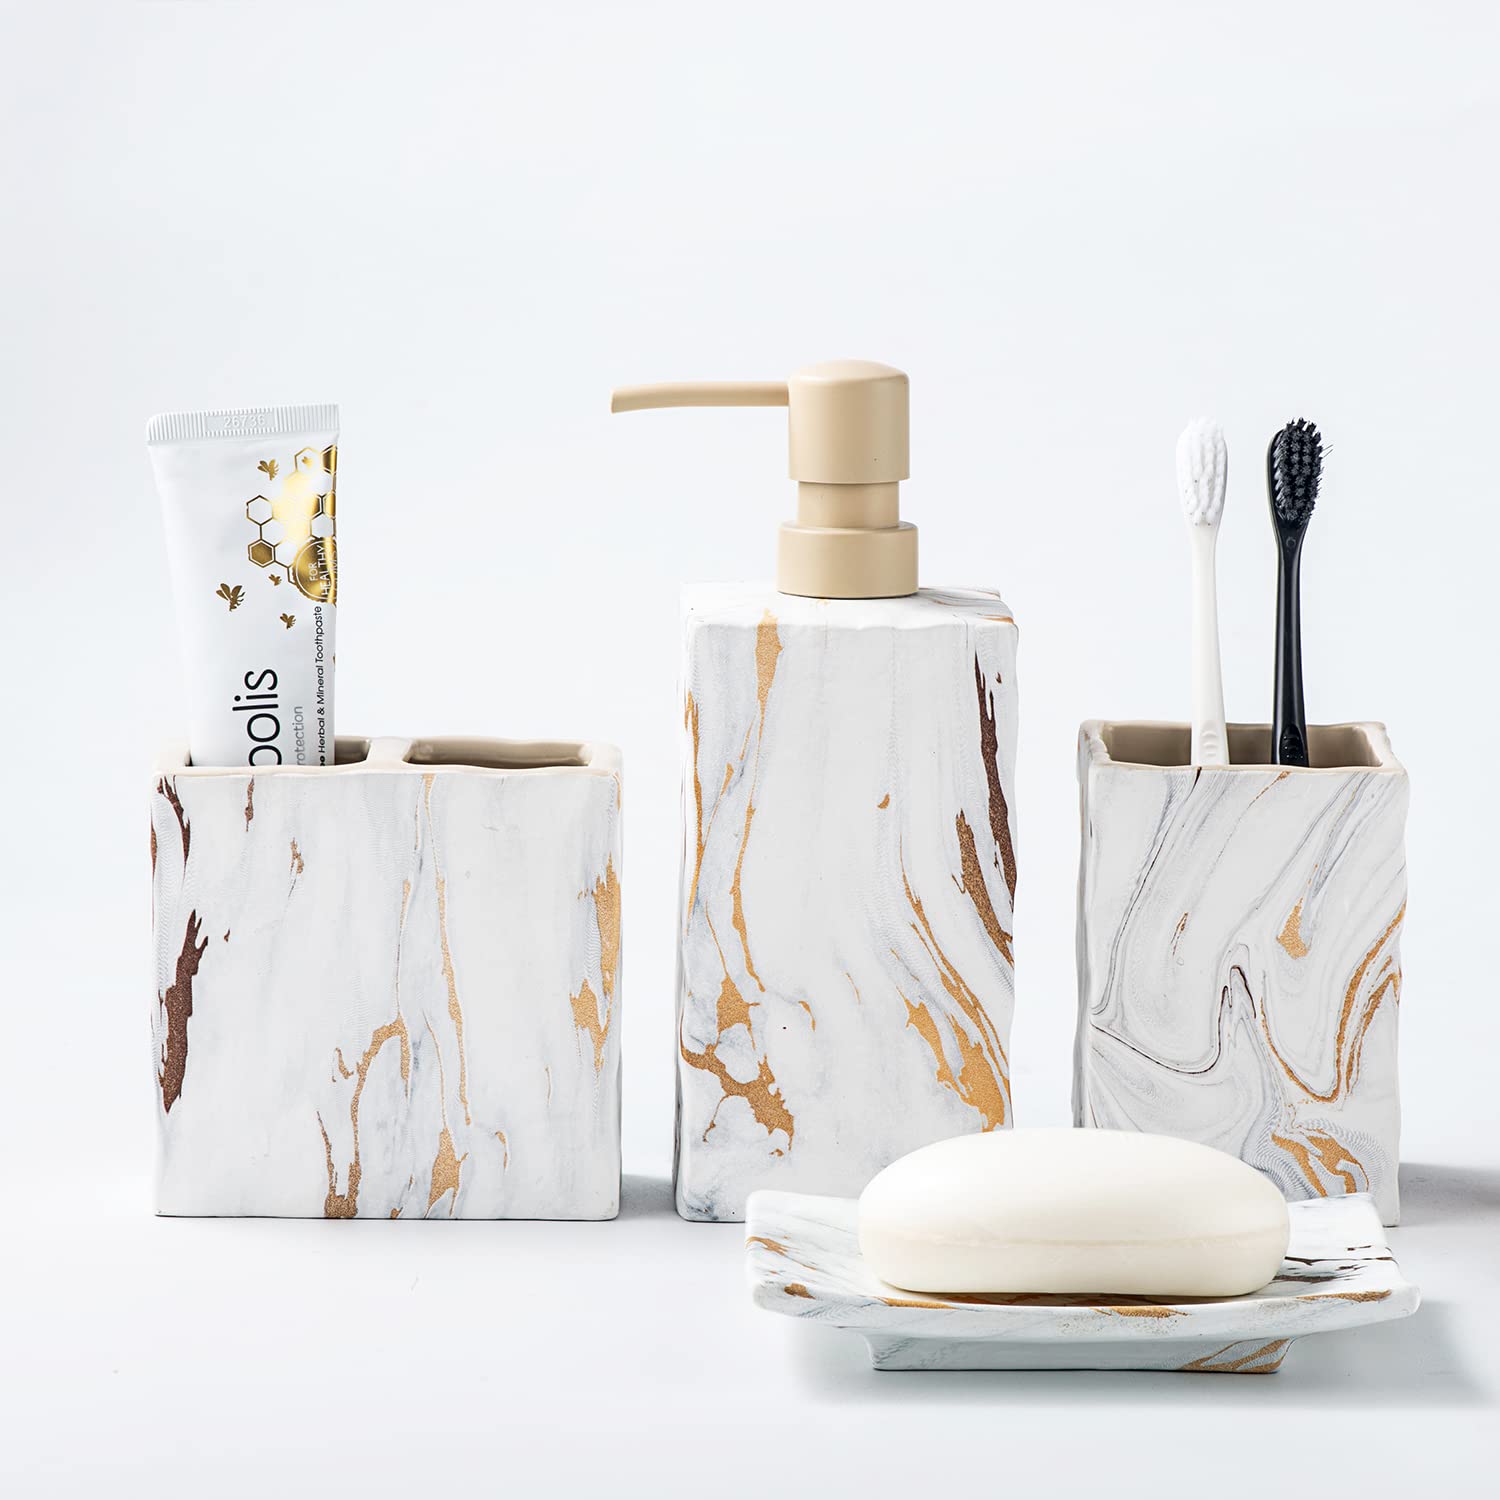 RQYIXI Ceramic Bathroom Accessory Set Complete 4 Pieces Retro Style Soap Dispenser & Toothbrush Holder Sets (Marble Gold)